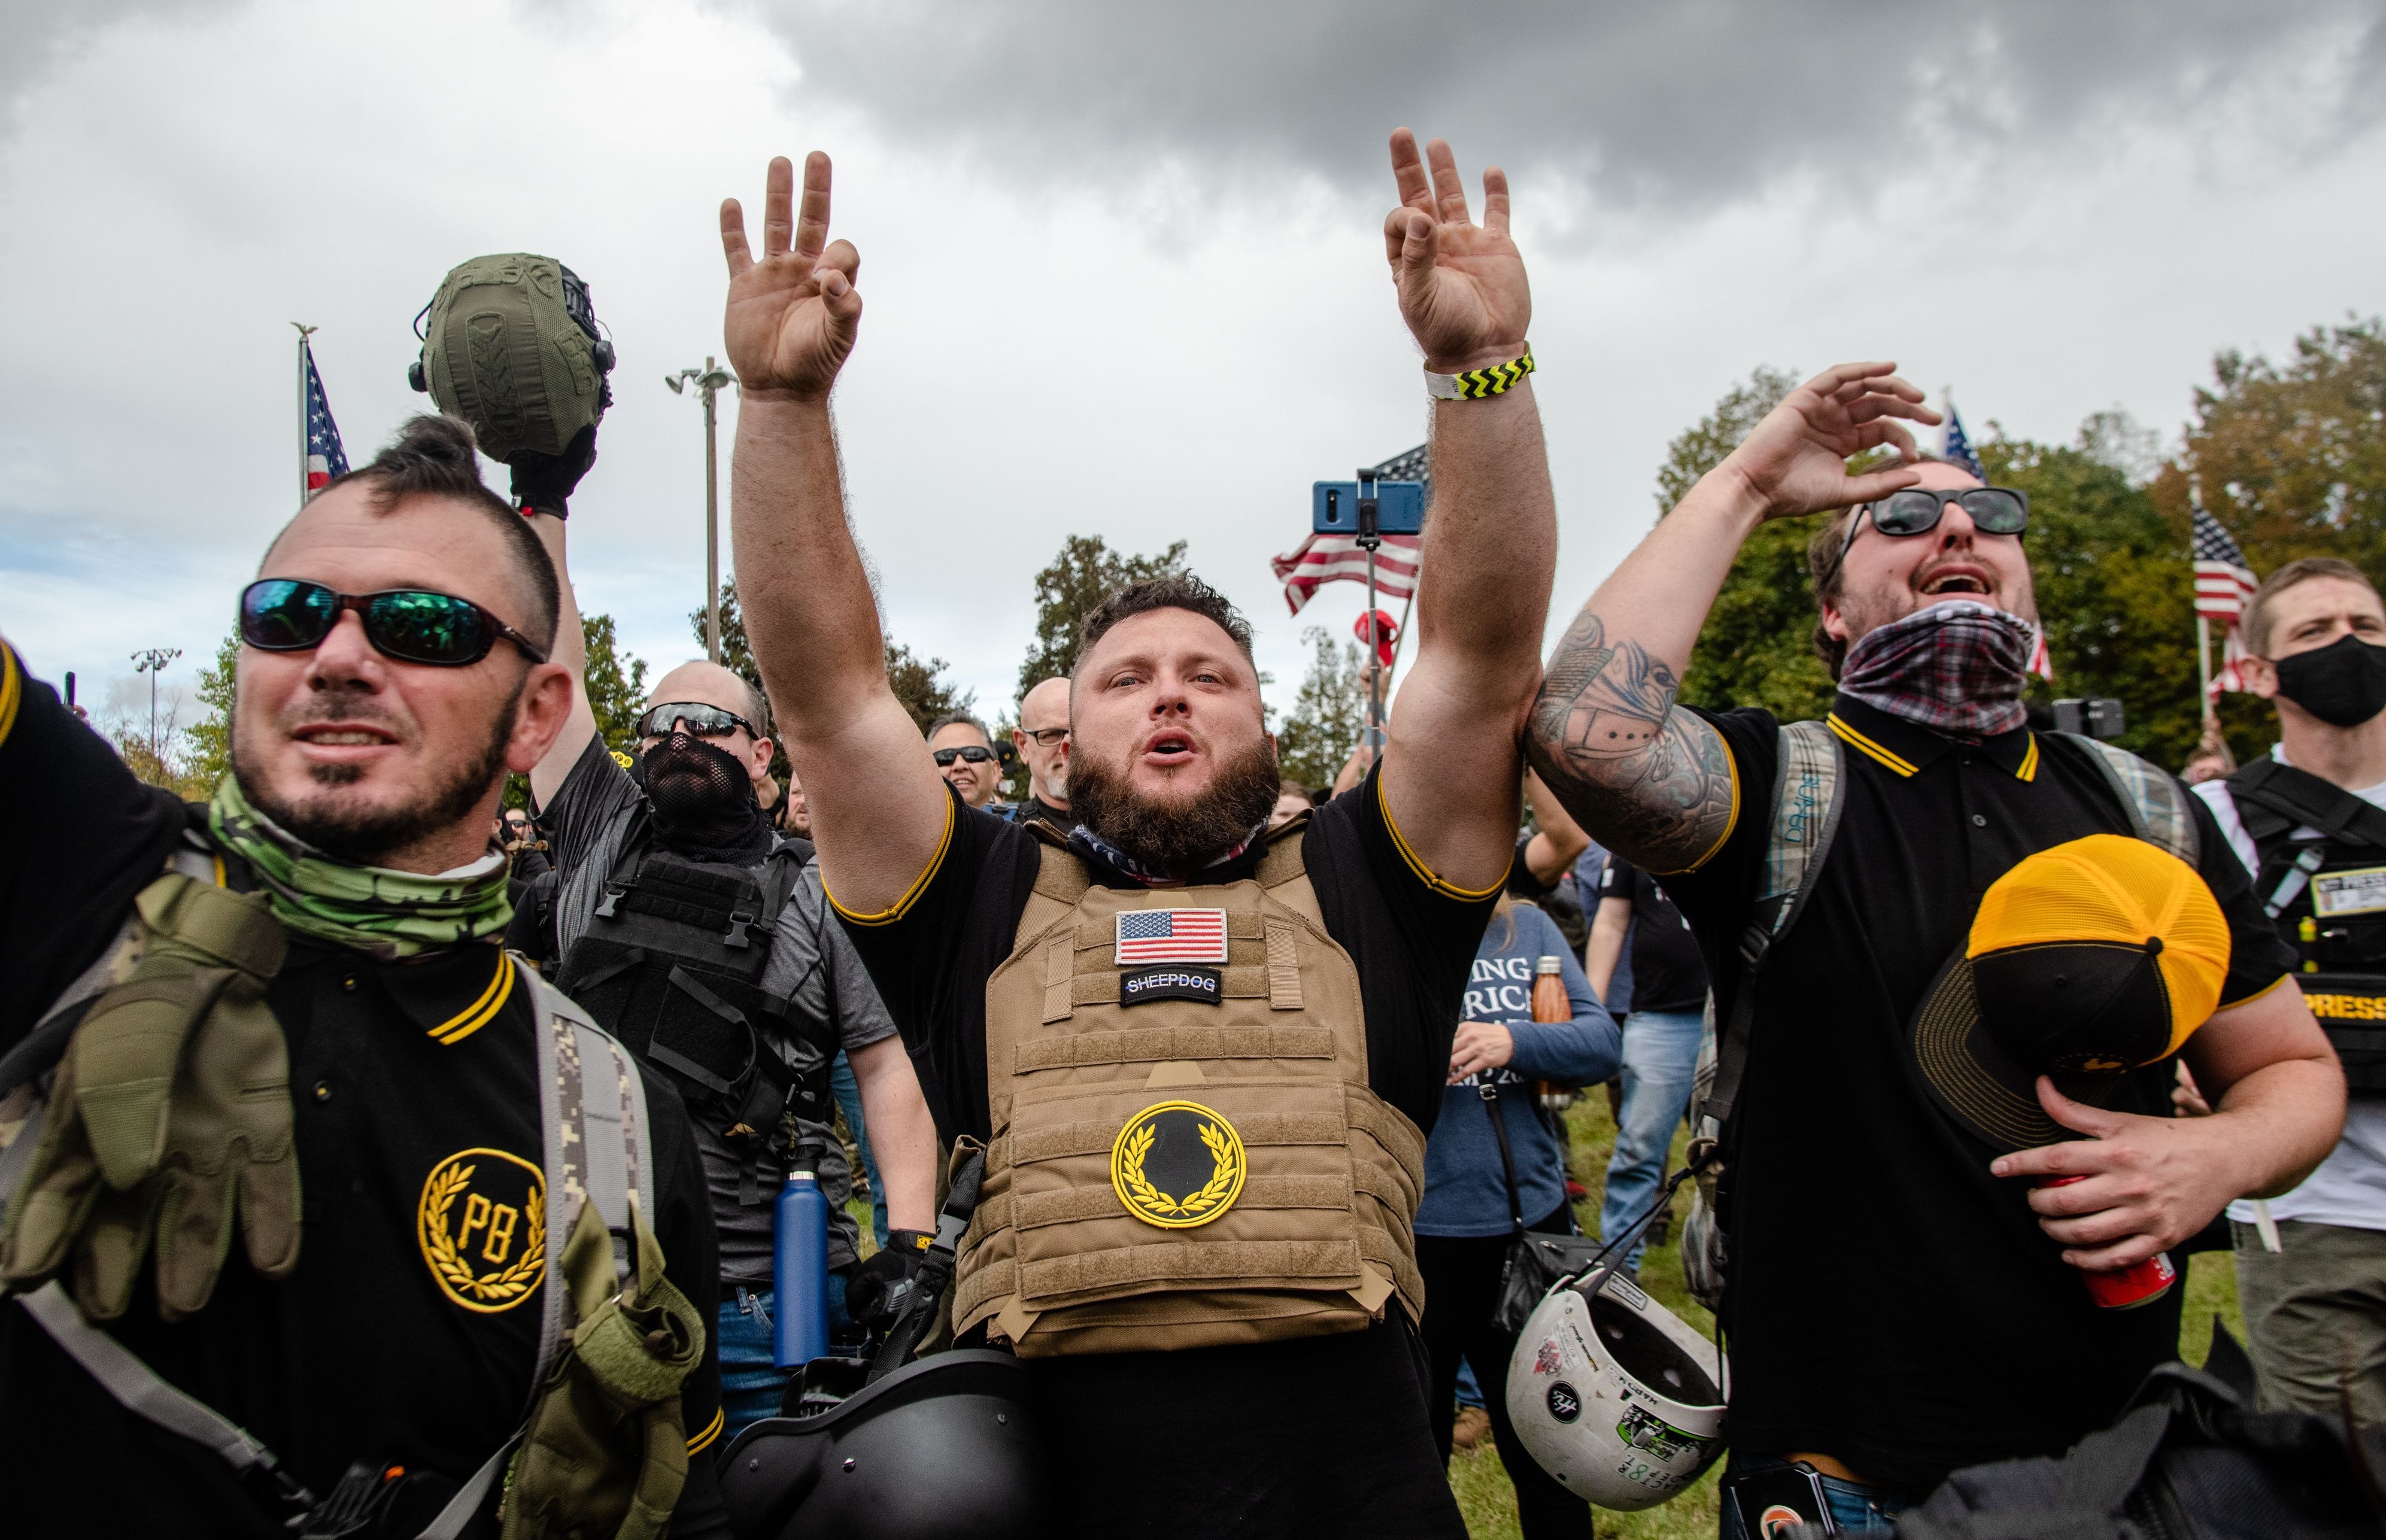 Subpoenas Issued for January 6 to Proud Boys, Oathkeepers